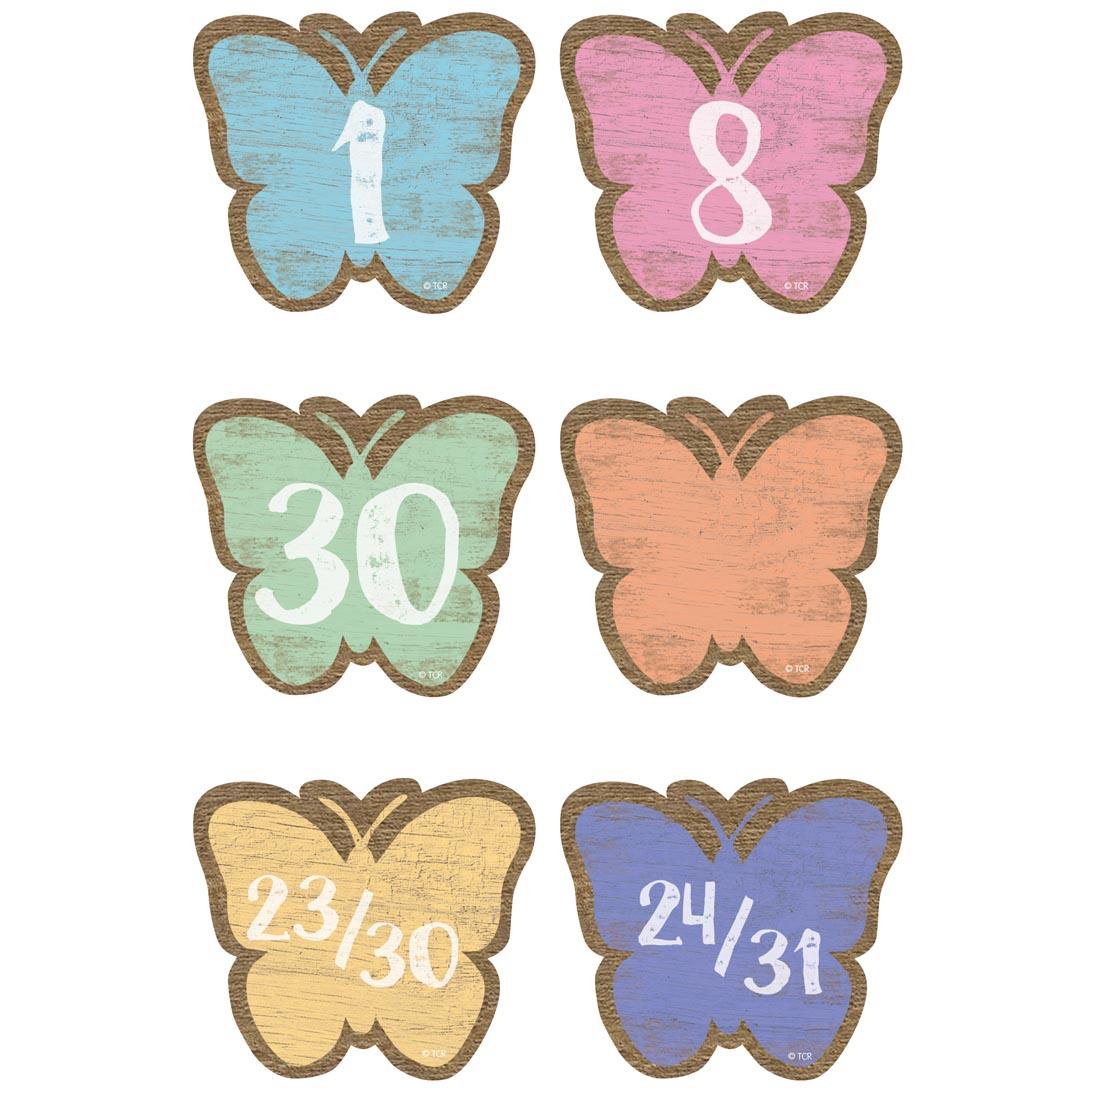 Butterflies Calendar Days from the Home Sweet Classroom collection by Teacher Created Resources